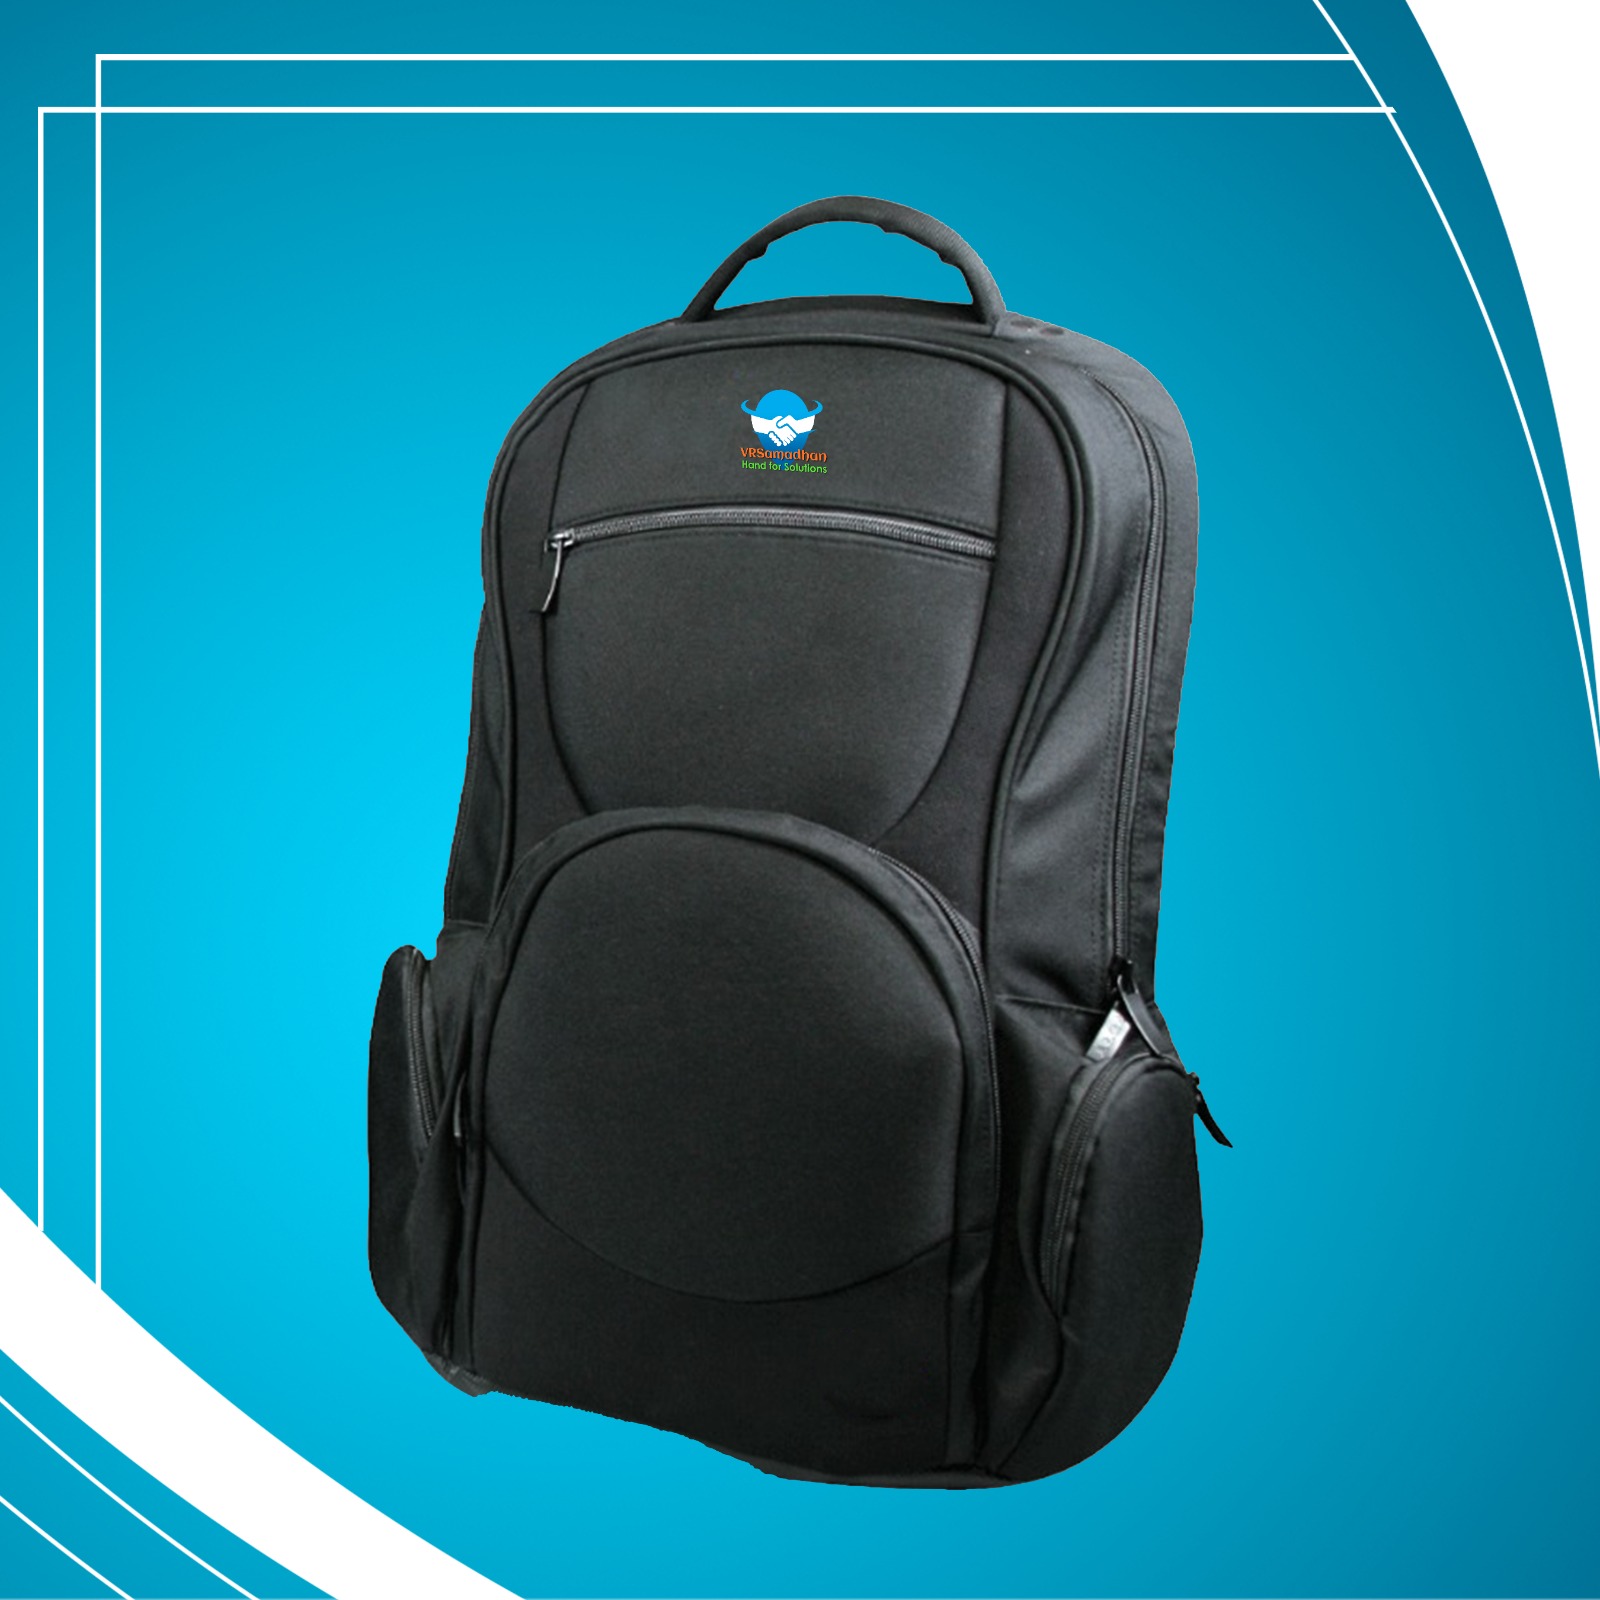 PROMOTIONAL BACKPACK BAGS